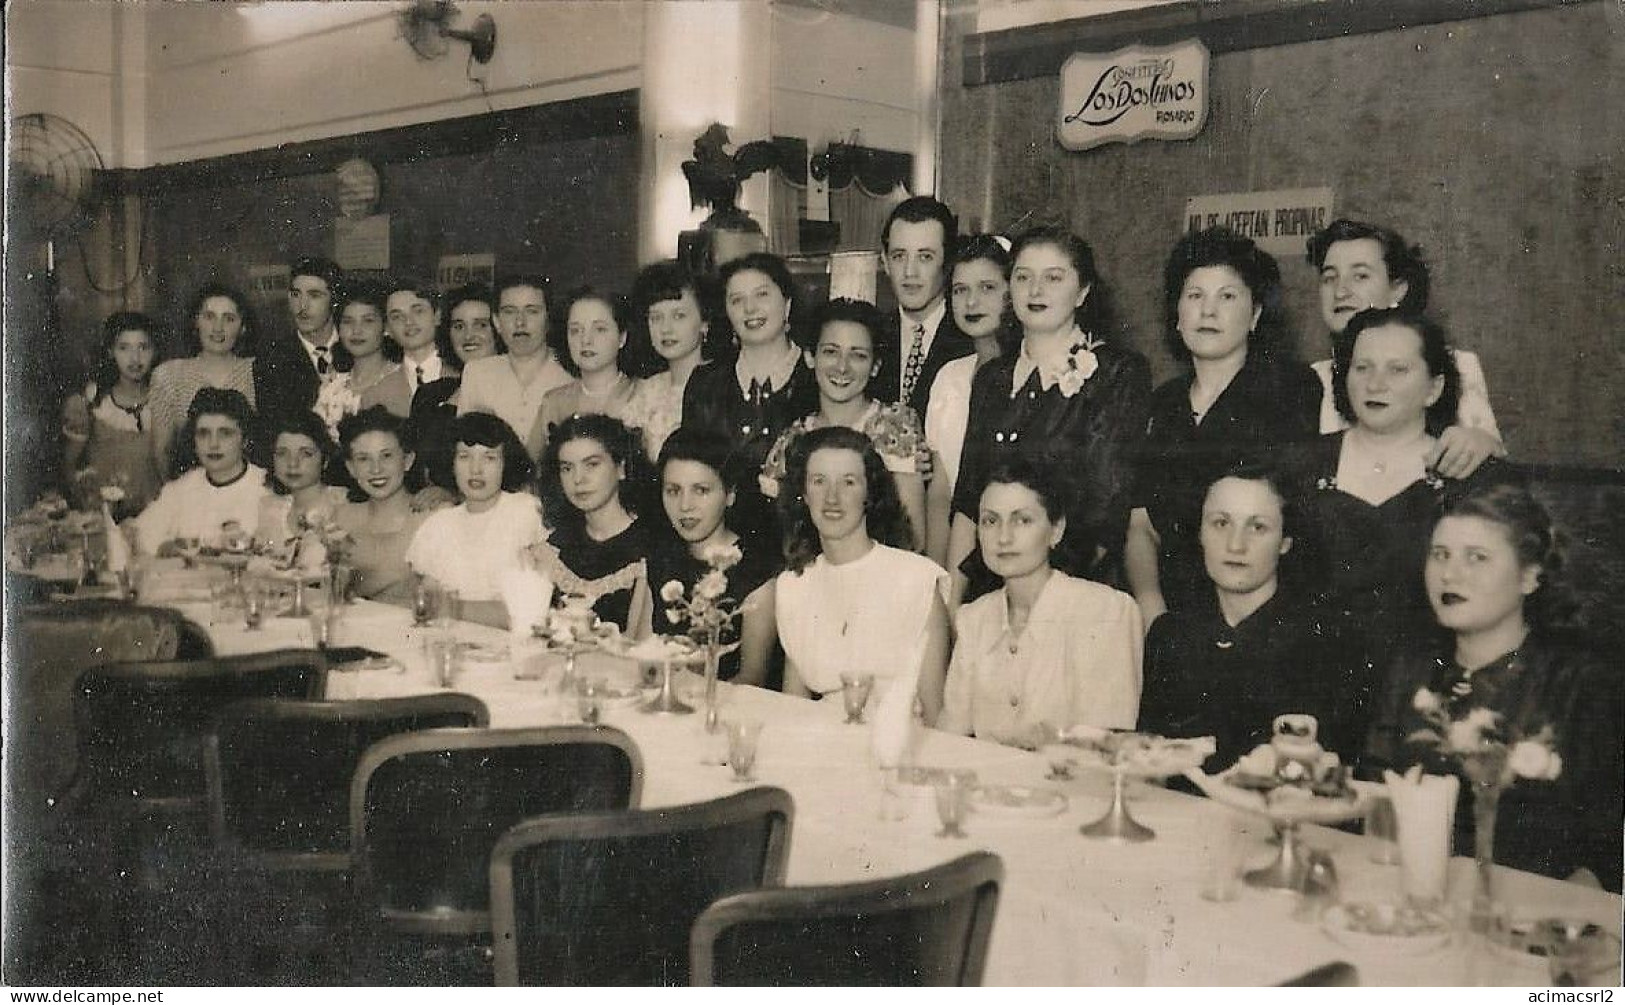 X4263 Pretty WOMEN Together In LOS DOS CHINOS Restaurant Argentina - Photo 15x9cm 1940' - Pin-up